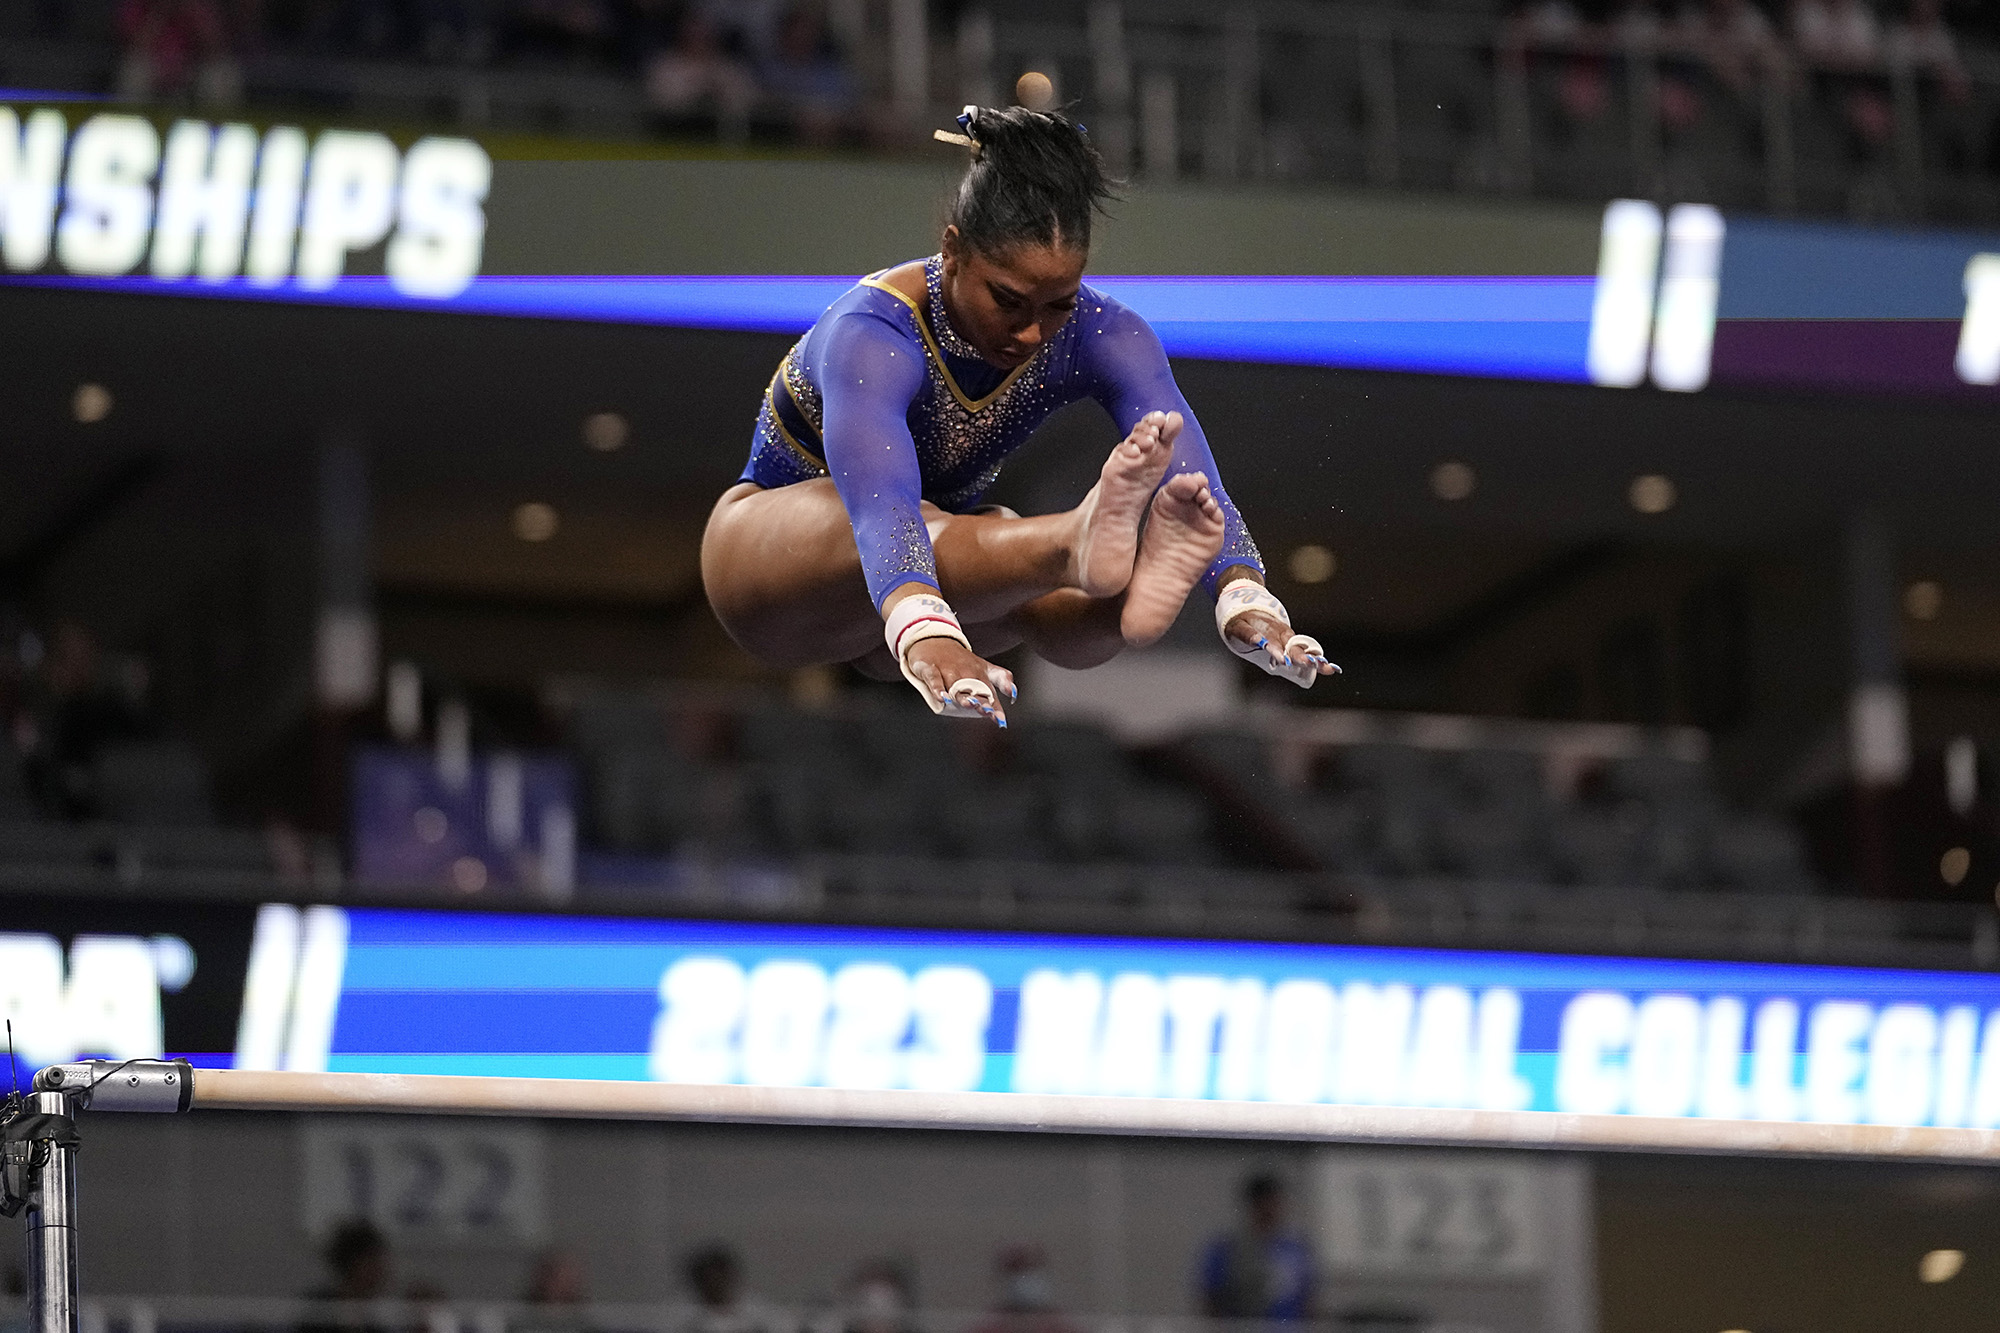 UCLA's Jordan Chiles competes on the uneven parallel bars during the semifinals of the NCAA women's gymnastics championships, Thursday, April 13, 2023, in Fort Worth, Texas.